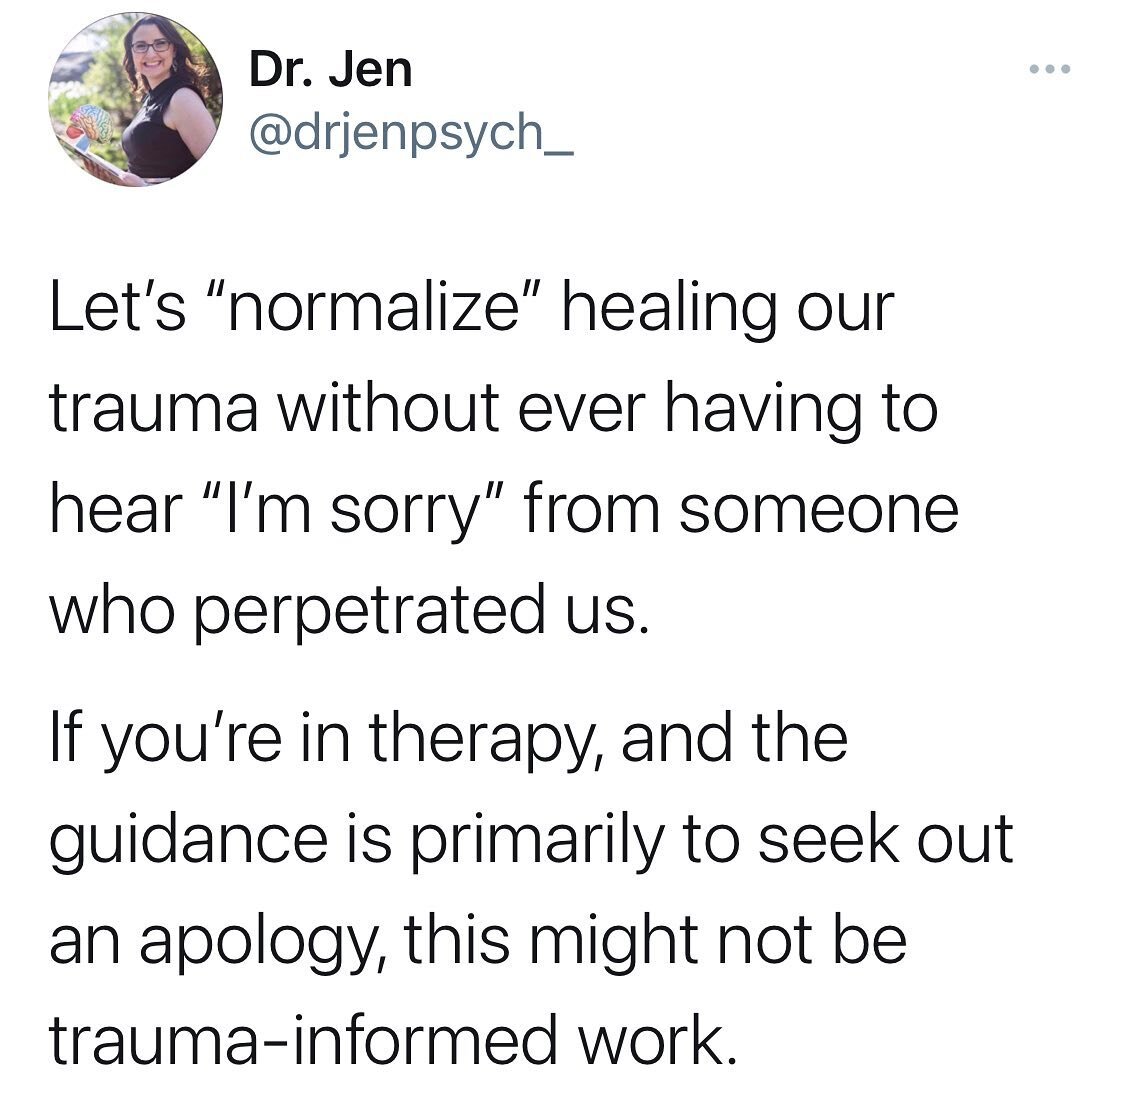 Follow @drjenpsych_ for more 𝘽𝙧𝙖𝙄𝙣𝙨𝙥𝙞𝙧𝙚𝙙 posts 💕🧠⁣

Sometimes the healing IS in the setting of strict boundaries. While an apology might feel good, we can&rsquo;t romanticize needing one in order to heal. It&rsquo;s just not true. 

Many